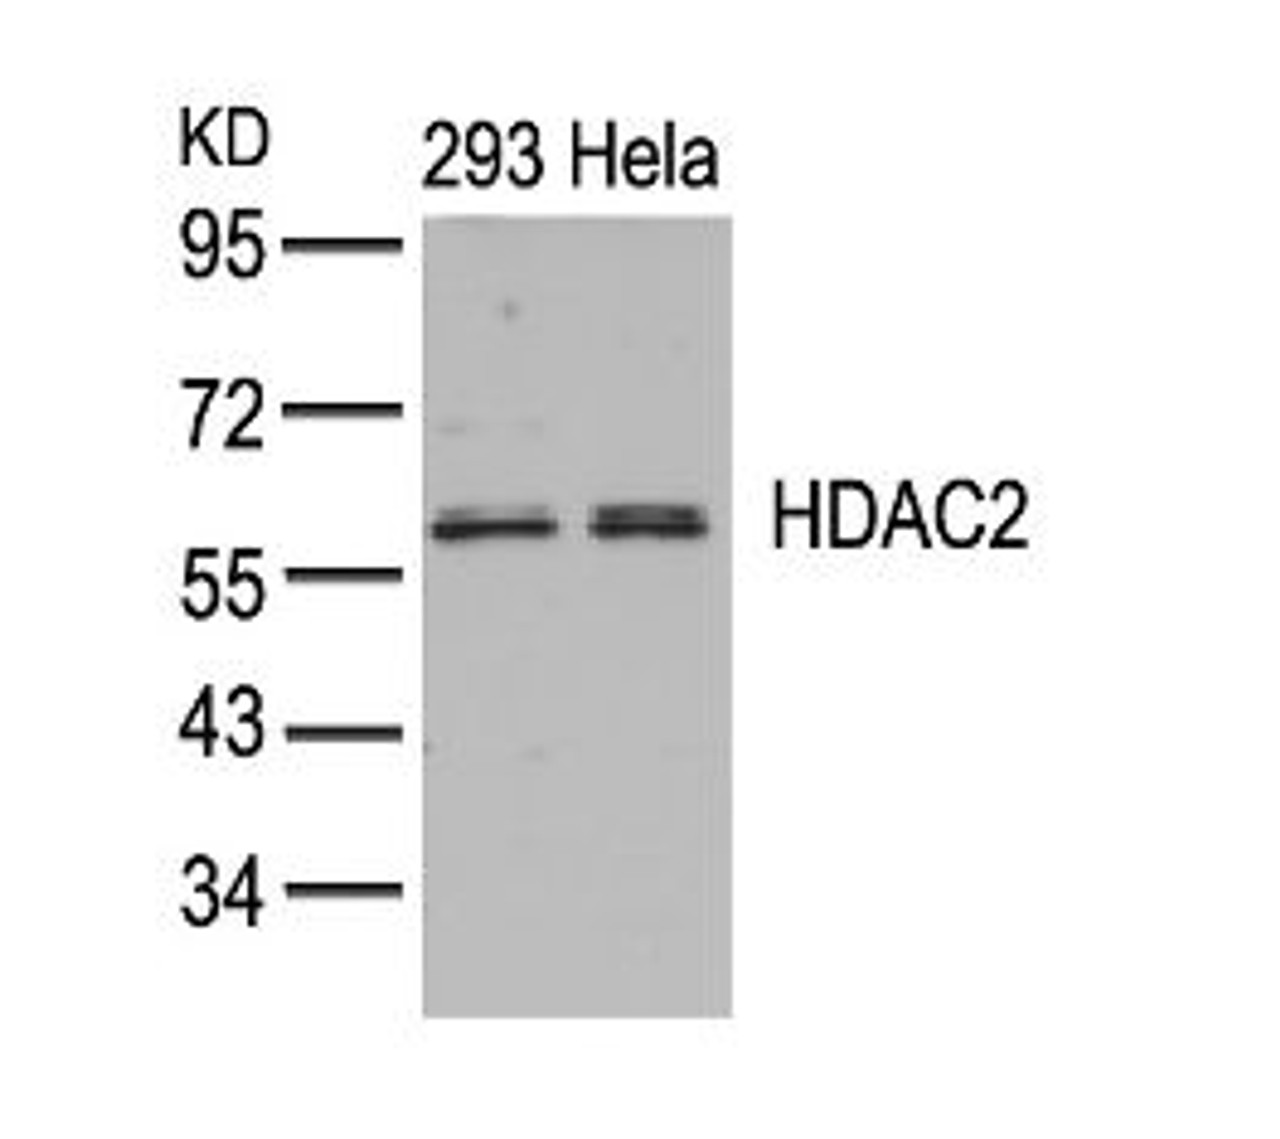 Western blot analysis of lysed extracts from 293 and HeLa cells using HDAC2 (Ab-394) .